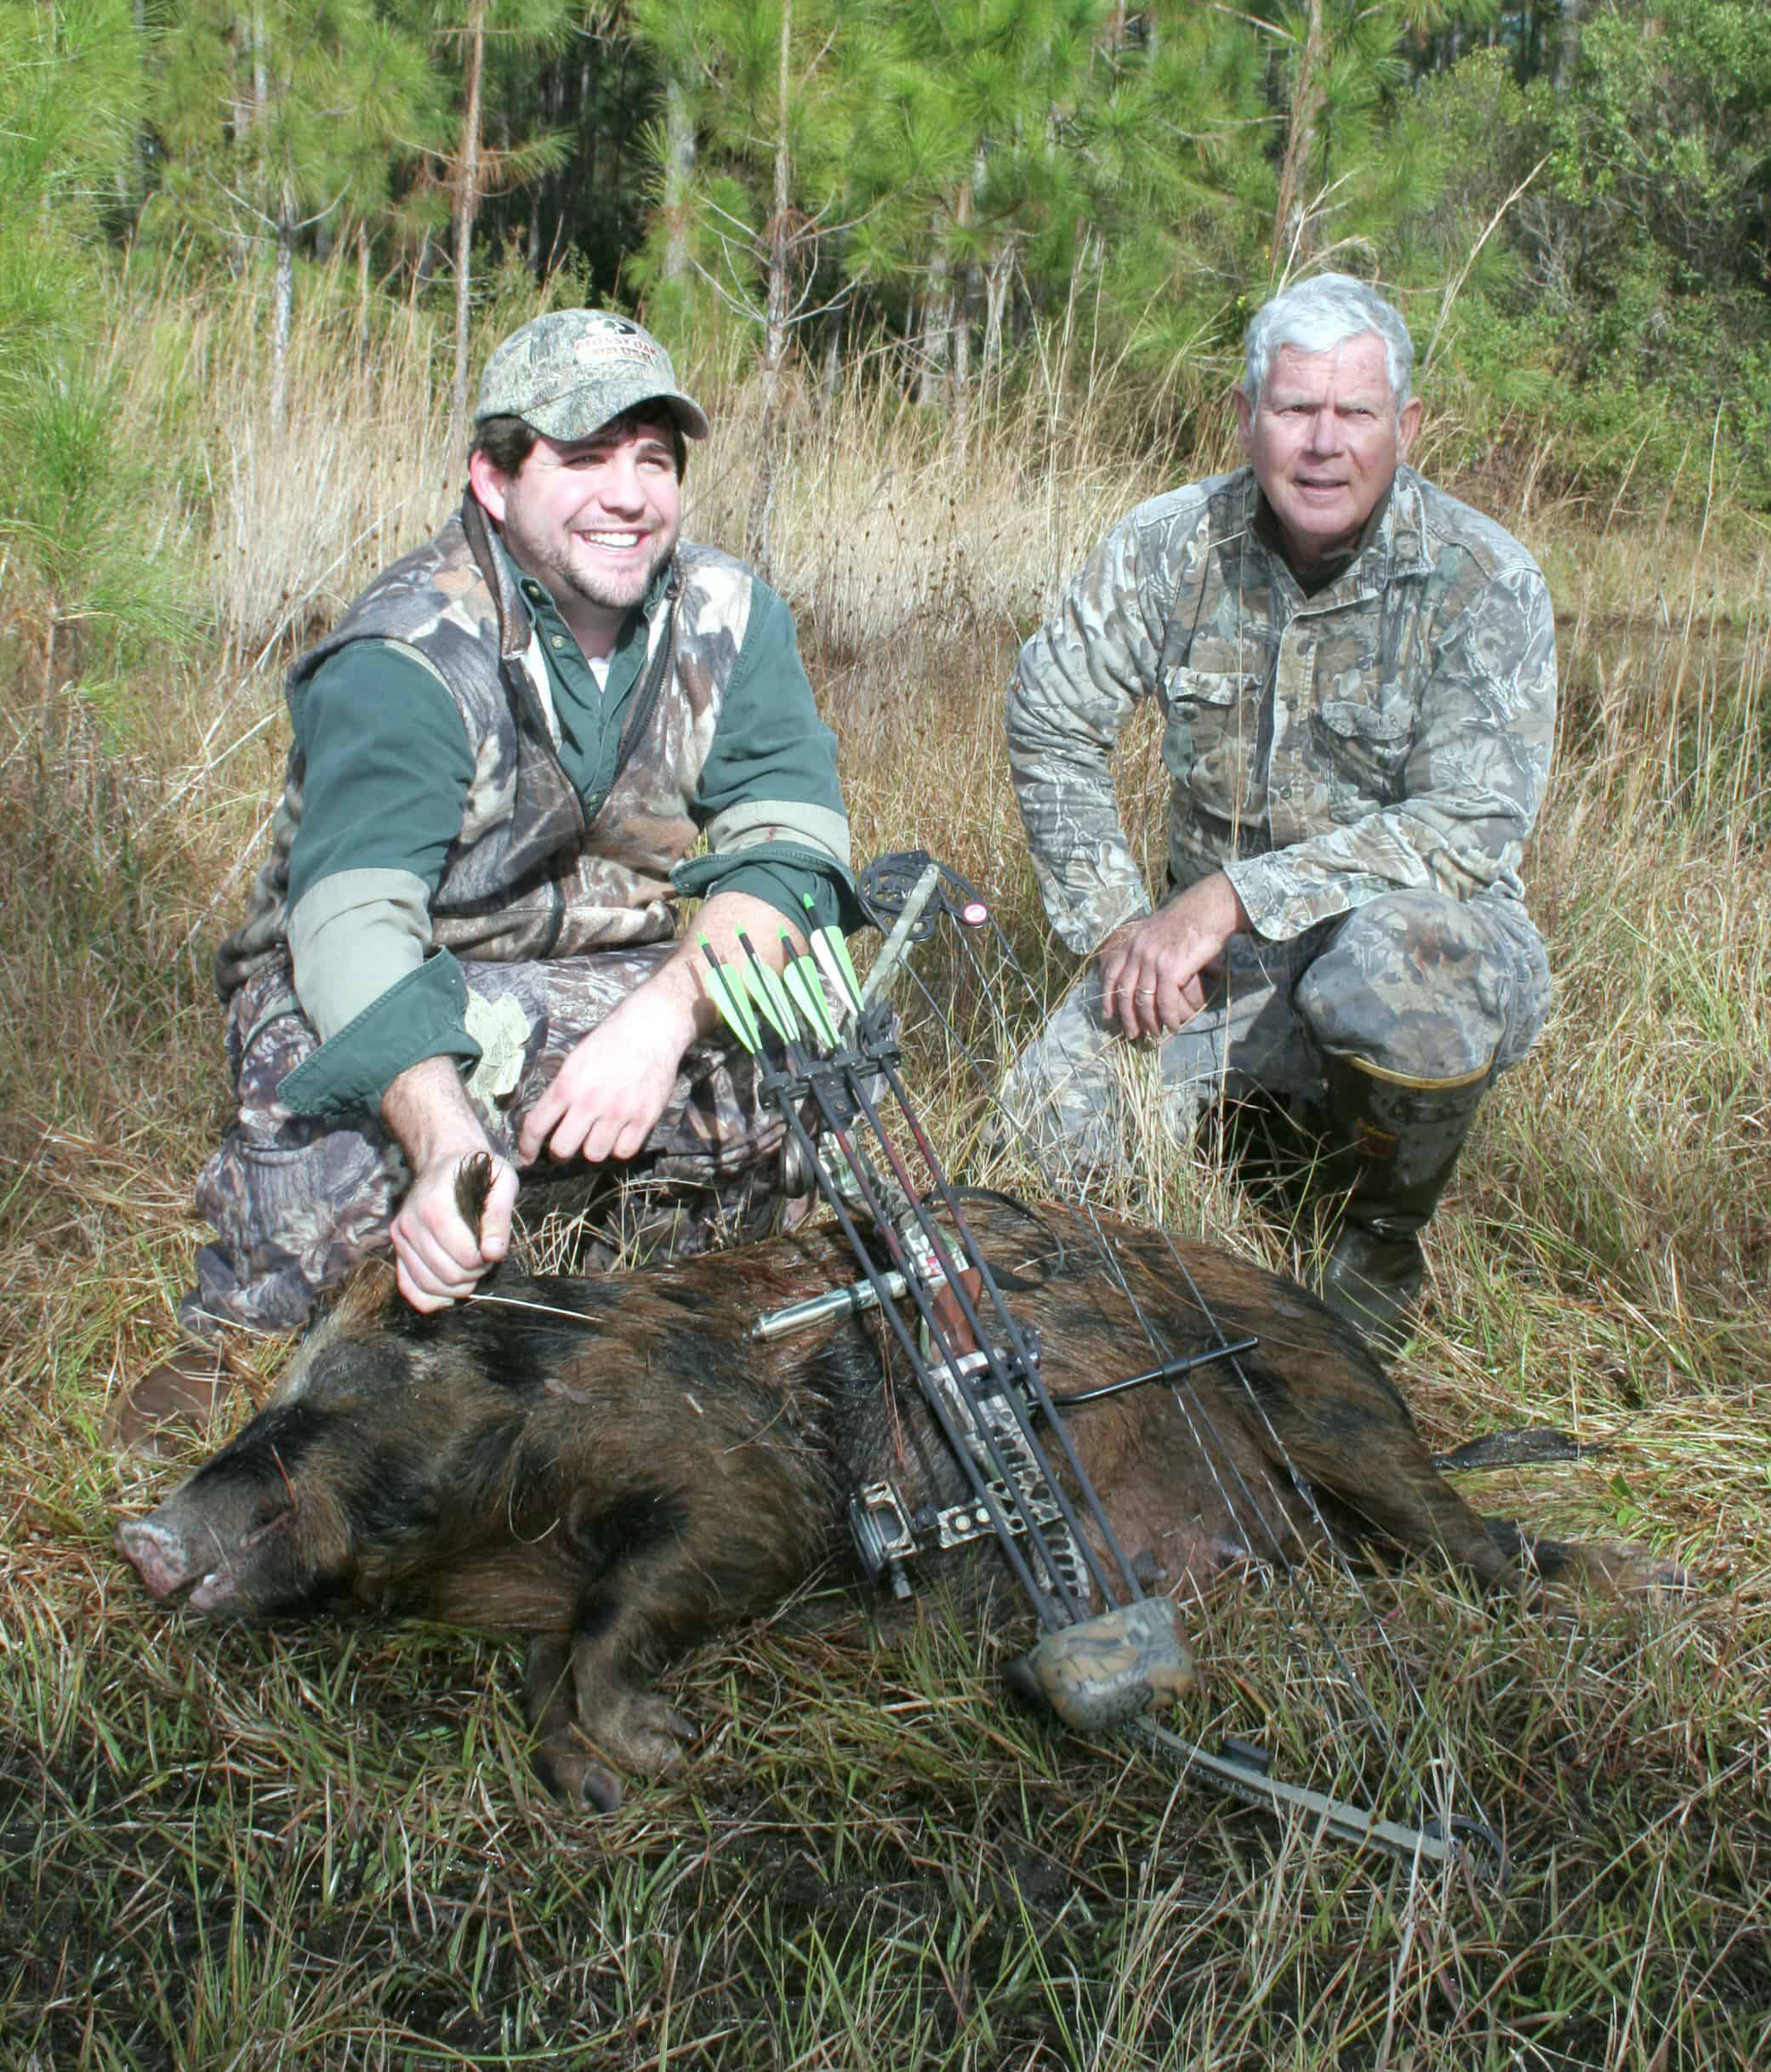 Wildlife mangers want to get rid of wild hogs, so bag limits and hunting seasons rarely exist. The wide-open hunting opportunity lends itself to more challenging methods, like archery and crossbow hunting.